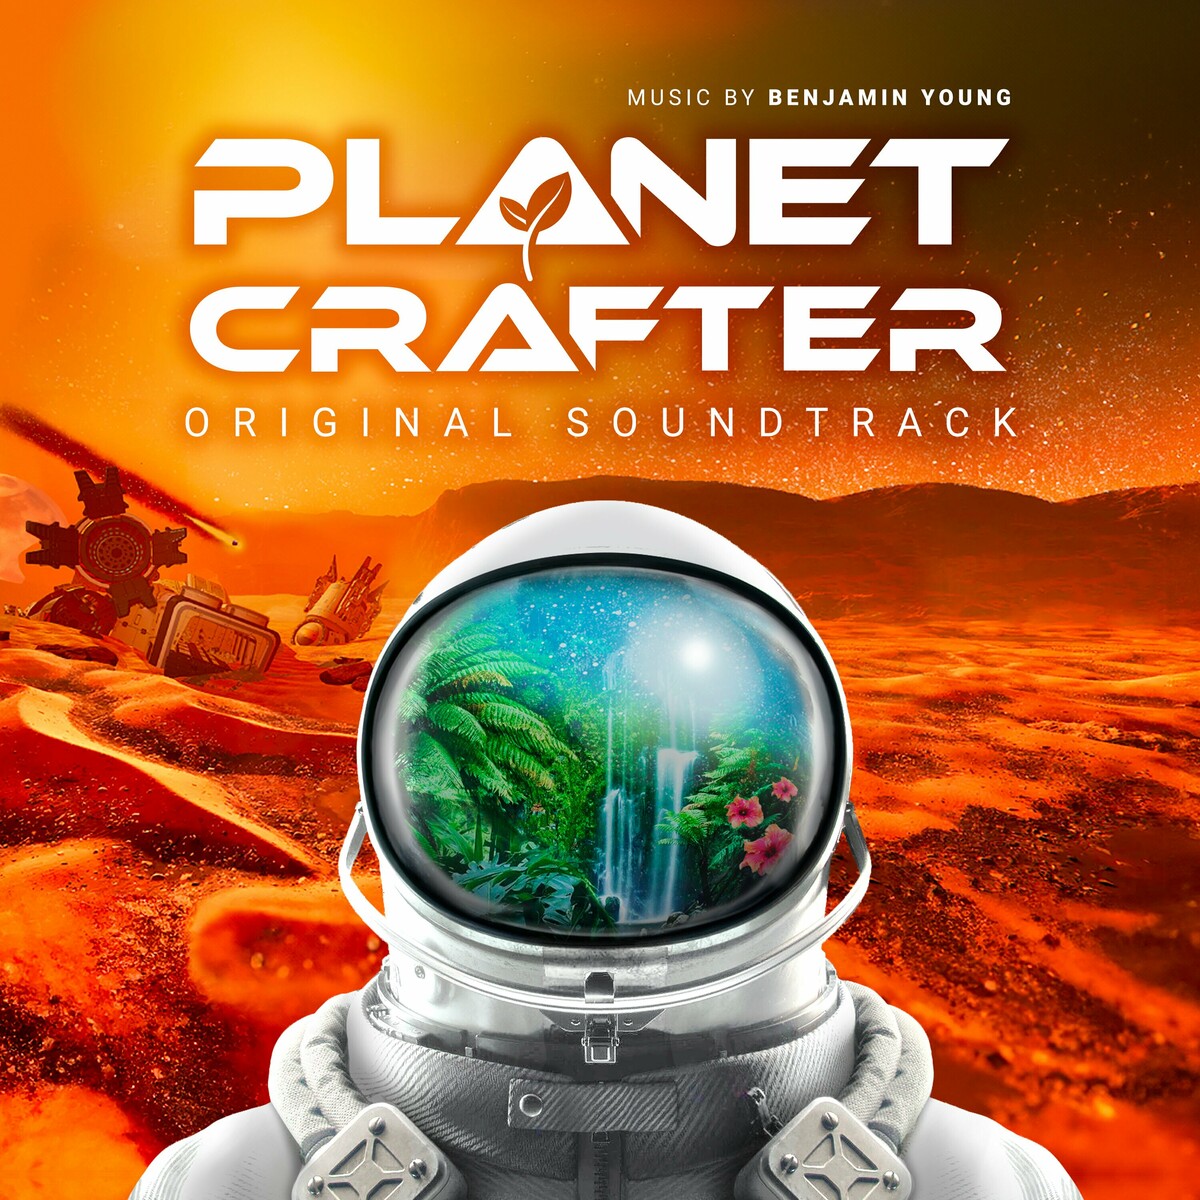 Planet Crafter Soundtrack (by Benjamin Young) -- Seeders: 5 -- Leechers: 0